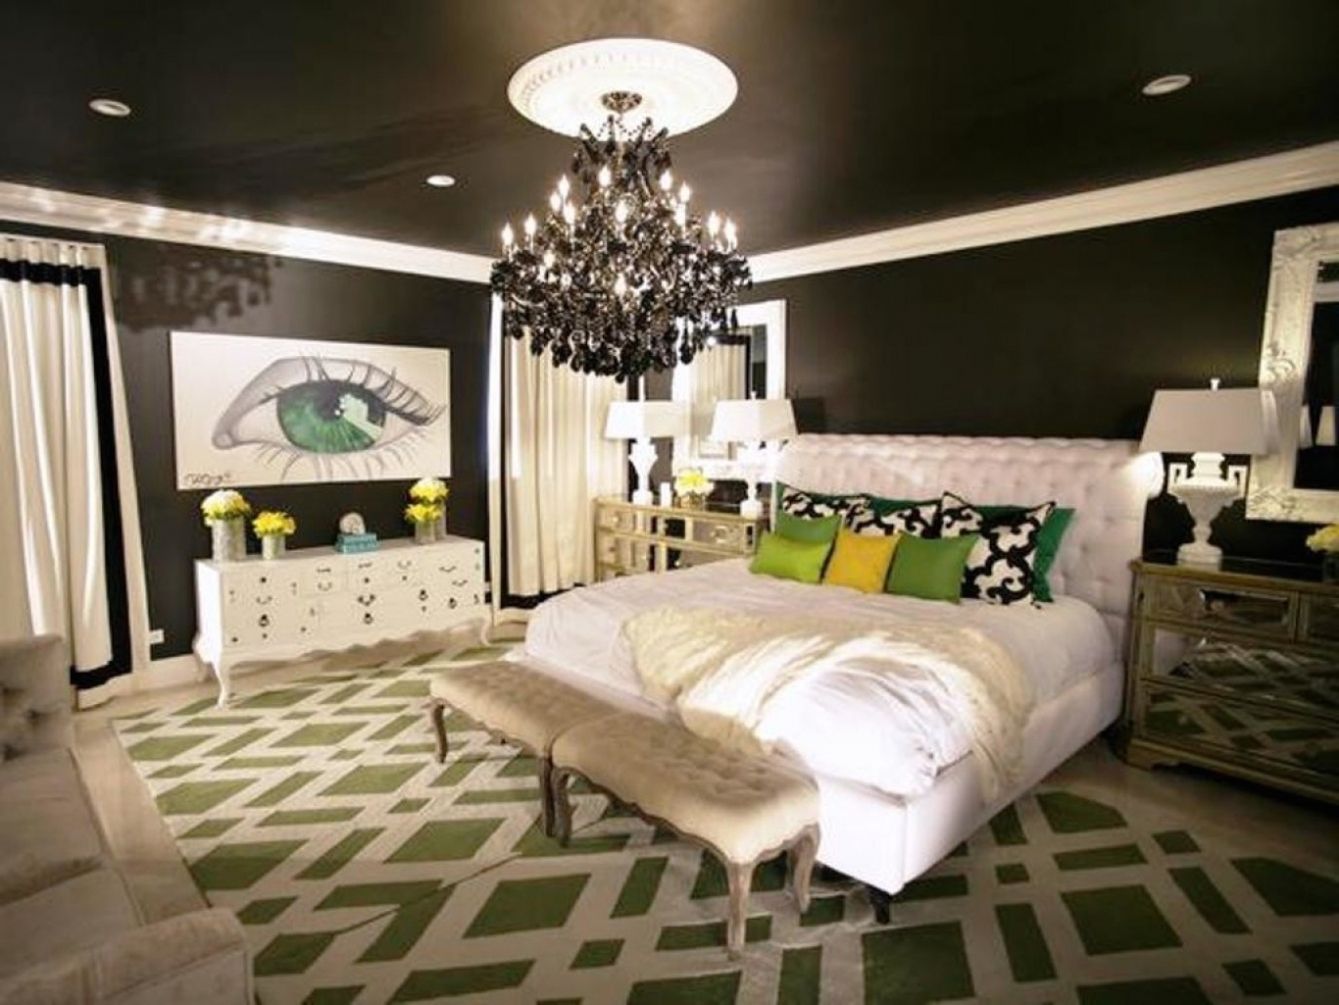 Widely Used Home Decor: Bedroom Chandelier Height Chandeliers In Bedrooms In Chandeliers In The Bedroom (View 4 of 20)